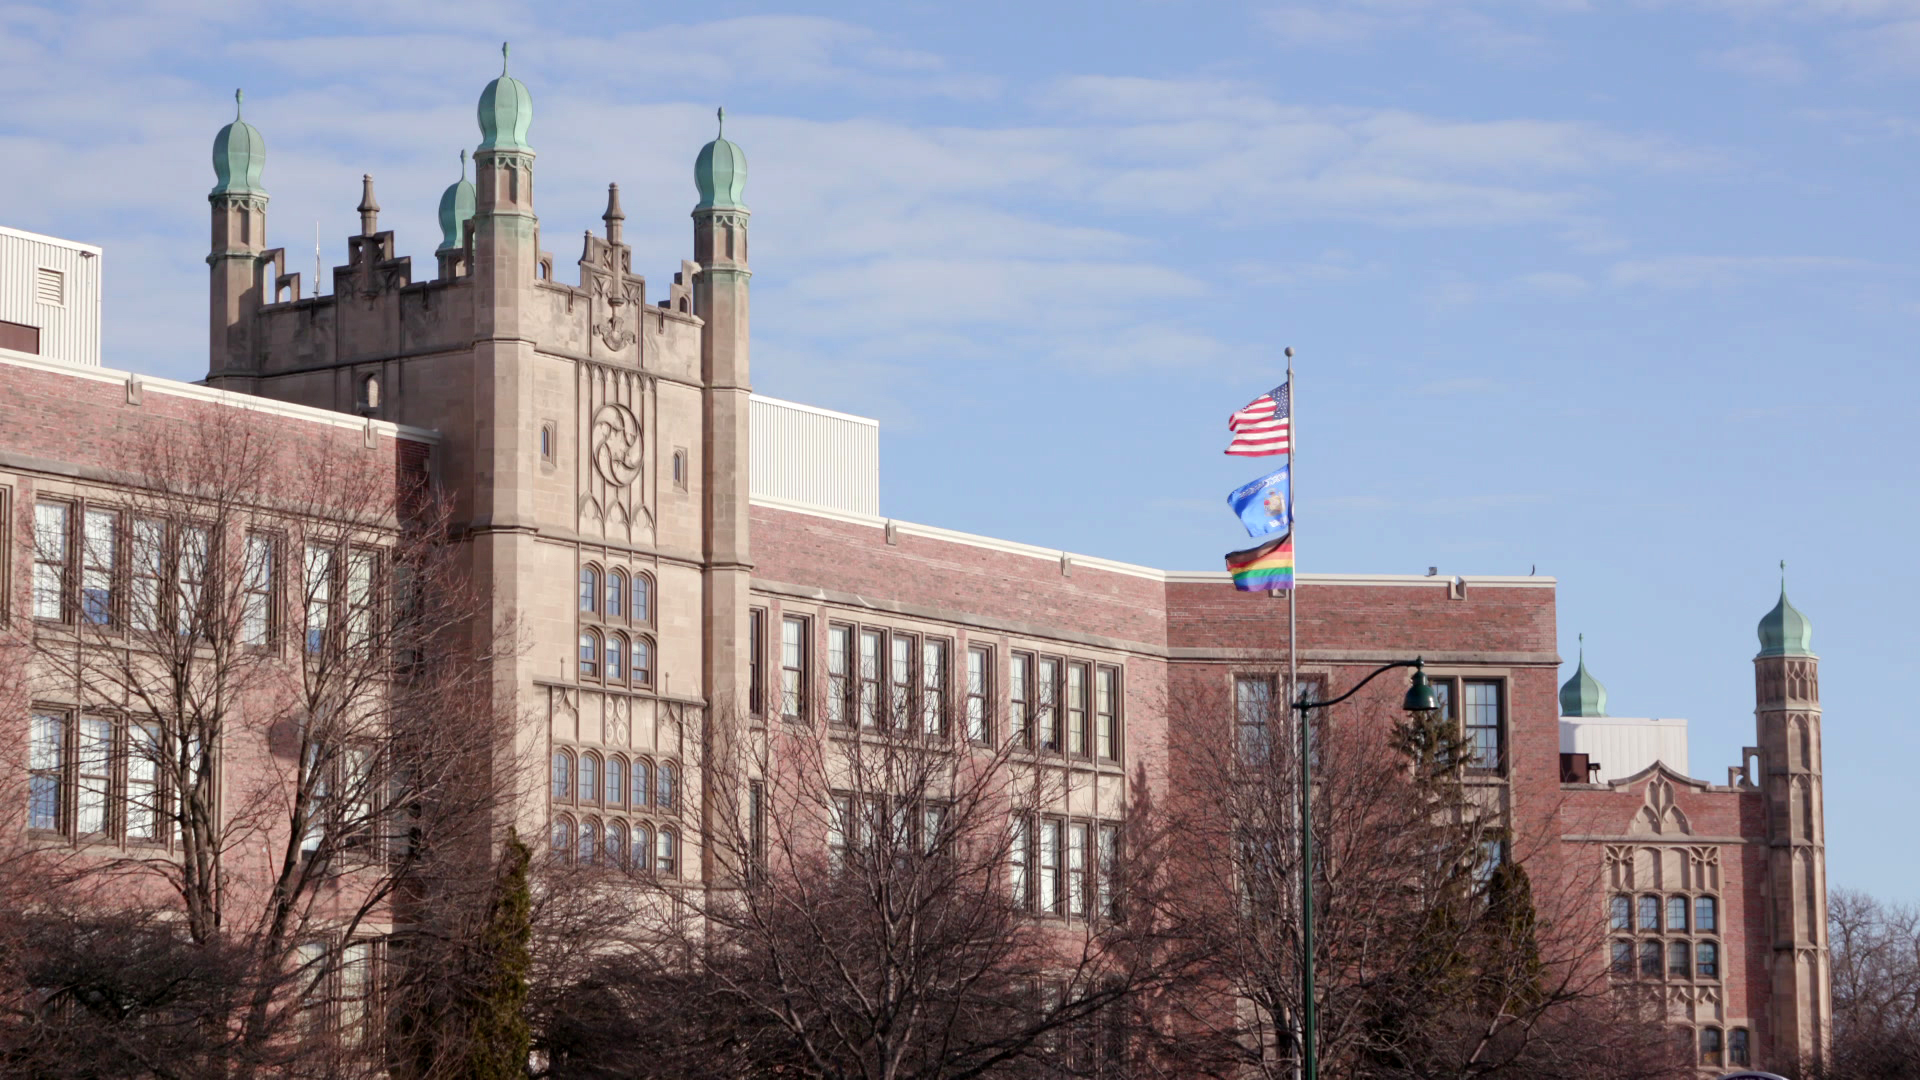 The U.S., Wisconsin and a Pride flag fly from a flagpole in front of a multi-story masonry and brick building with pillars on a central tower and on a wing topped by onion domes, along with HVAC machinery housing mounted on the roof, with leafless trees in the foreground.